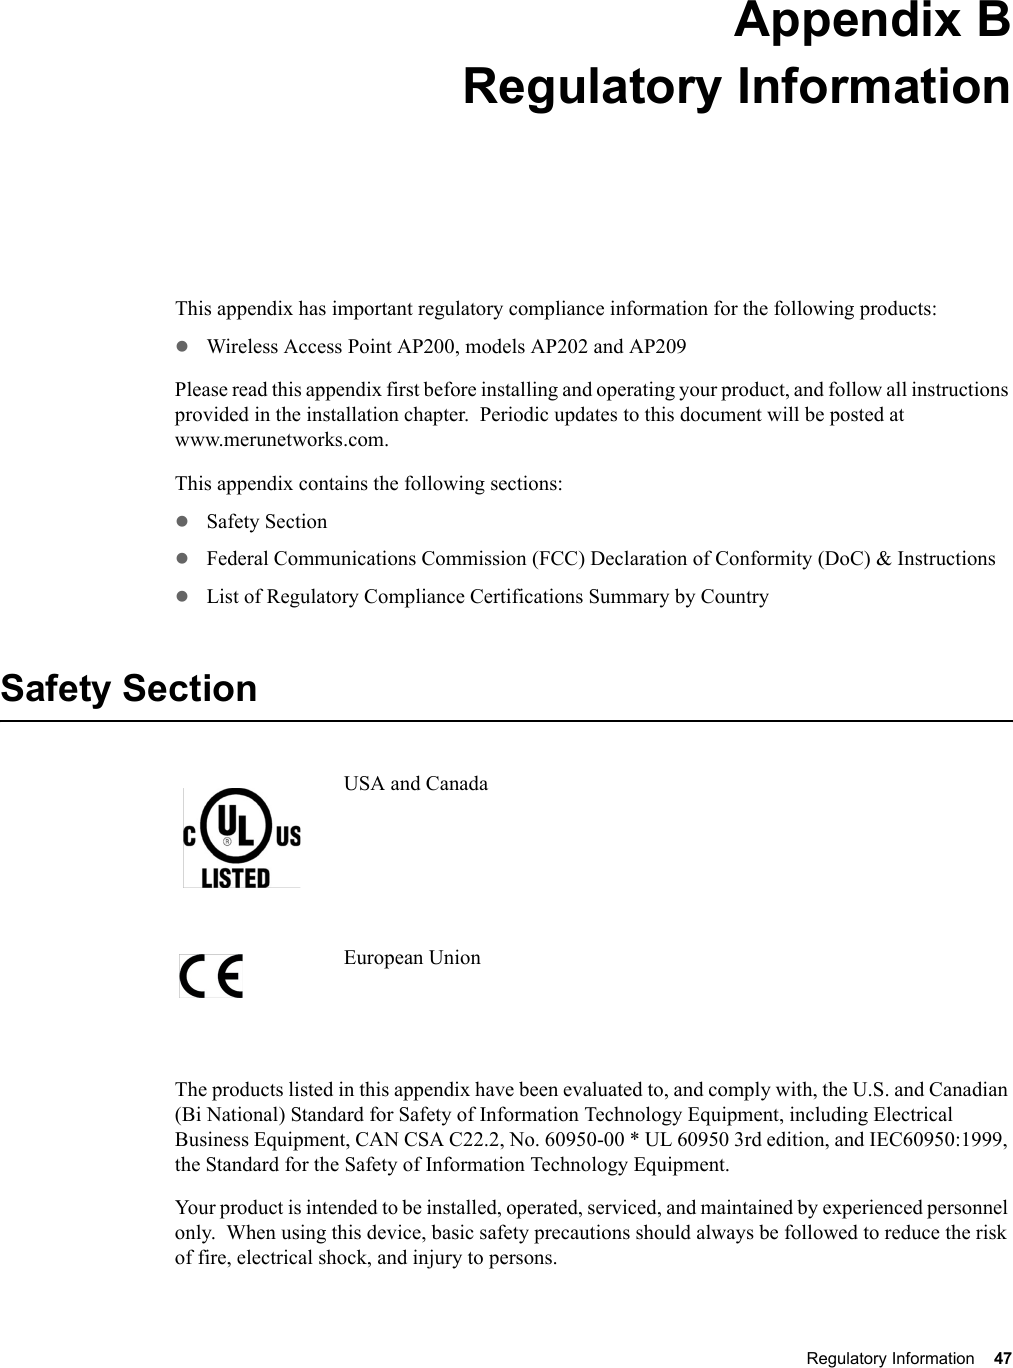 Regulatory Information 47 Appendix BRegulatory InformationB-1This appendix has important regulatory compliance information for the following products:zWireless Access Point AP200, models AP202 and AP209Please read this appendix first before installing and operating your product, and follow all instructions provided in the installation chapter.  Periodic updates to this document will be posted at www.merunetworks.com.This appendix contains the following sections:zSafety SectionzFederal Communications Commission (FCC) Declaration of Conformity (DoC) &amp; InstructionszList of Regulatory Compliance Certifications Summary by CountrySafety SectionUSA and CanadaEuropean UnionThe products listed in this appendix have been evaluated to, and comply with, the U.S. and Canadian (Bi National) Standard for Safety of Information Technology Equipment, including Electrical Business Equipment, CAN CSA C22.2, No. 60950-00 * UL 60950 3rd edition, and IEC60950:1999, the Standard for the Safety of Information Technology Equipment.Your product is intended to be installed, operated, serviced, and maintained by experienced personnel only.  When using this device, basic safety precautions should always be followed to reduce the risk of fire, electrical shock, and injury to persons.